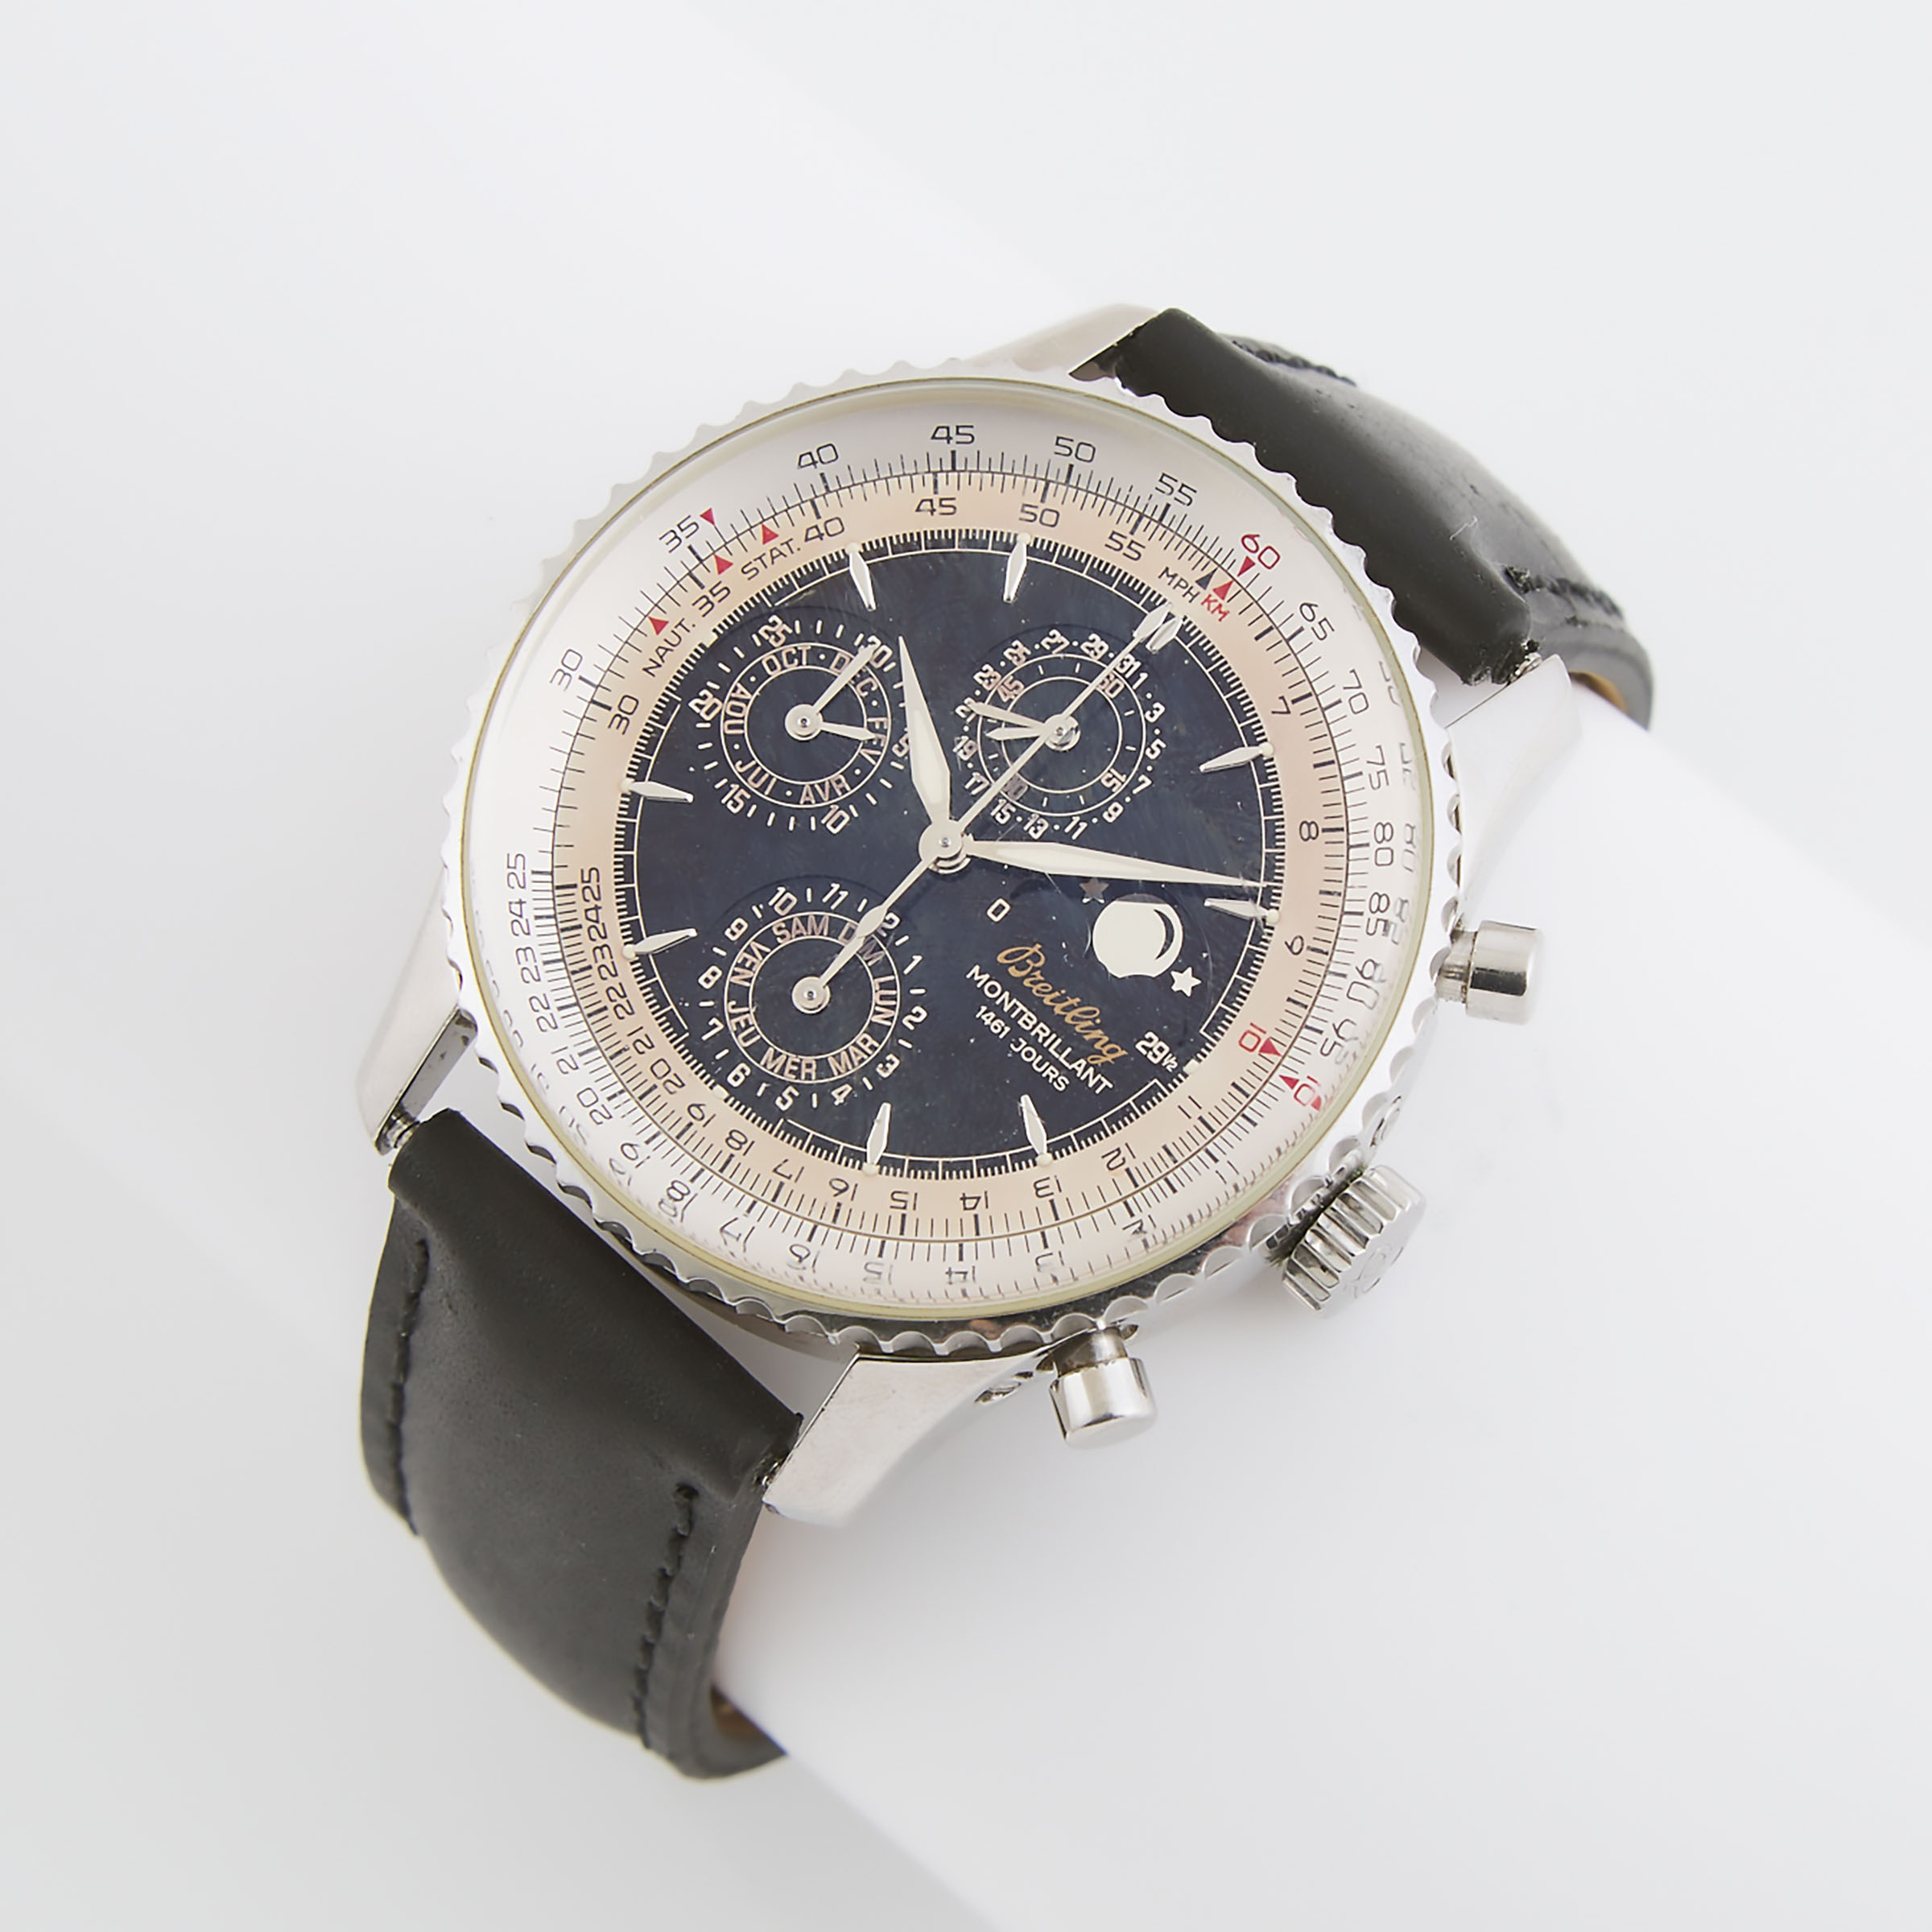 Breitling 'Montbrillant 1461 Jours' Wristwatch With Chronograph, Triple Calendar And Moon Phase